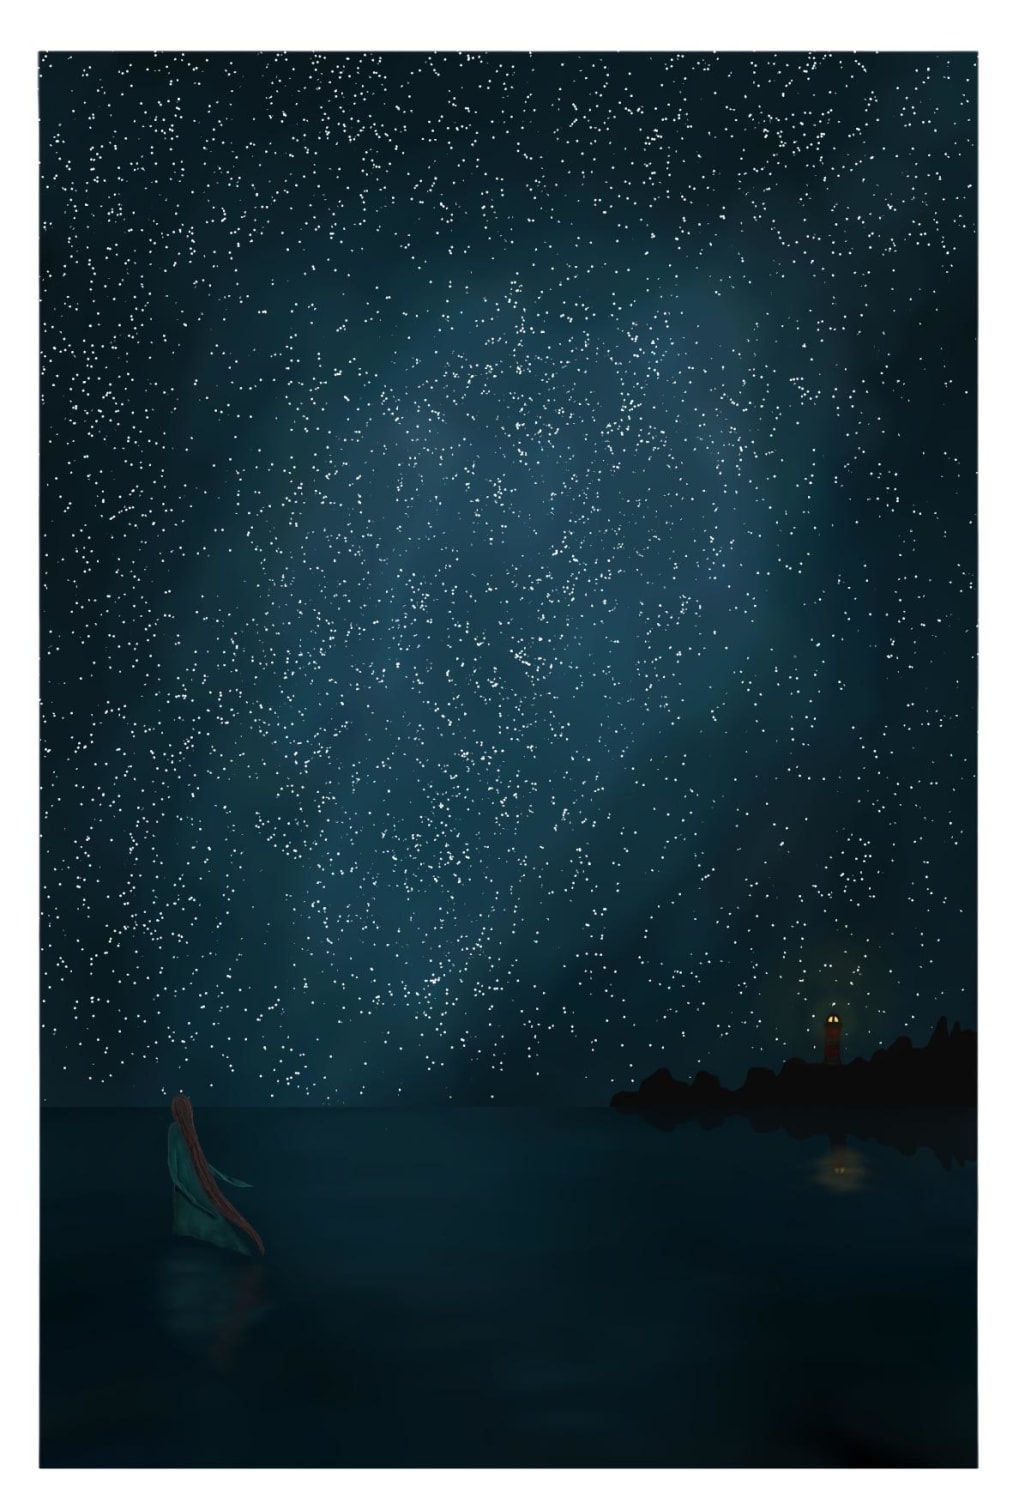 Watching the night sky [created by me]